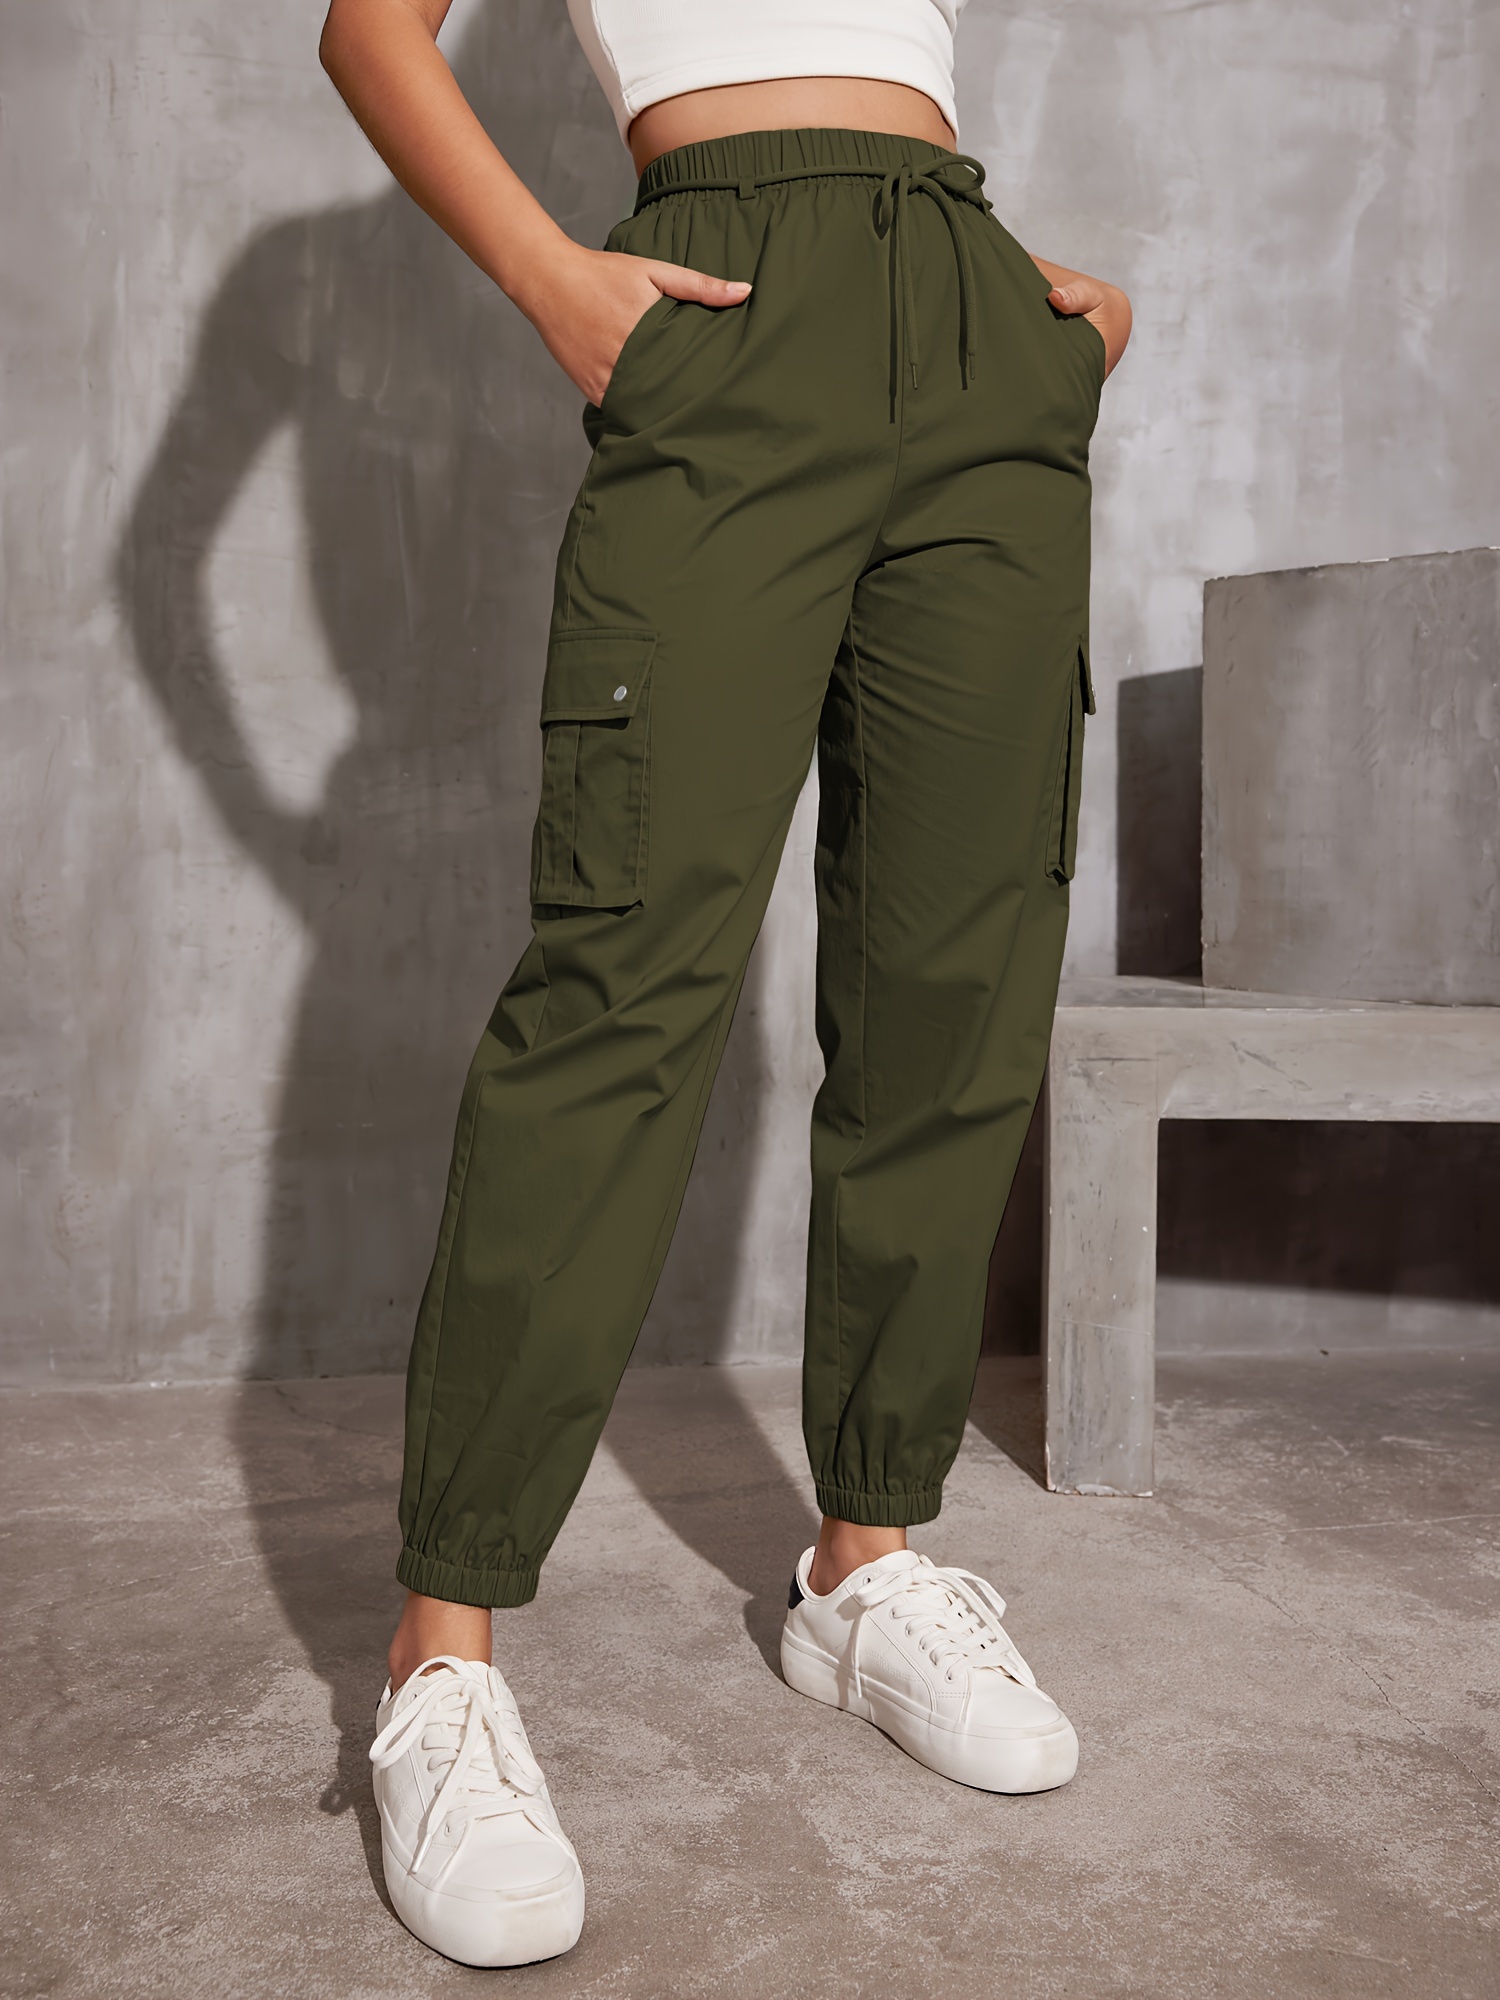 QUYUON Pull on Pants for Women Casual Loose Pockets Pants Fashion